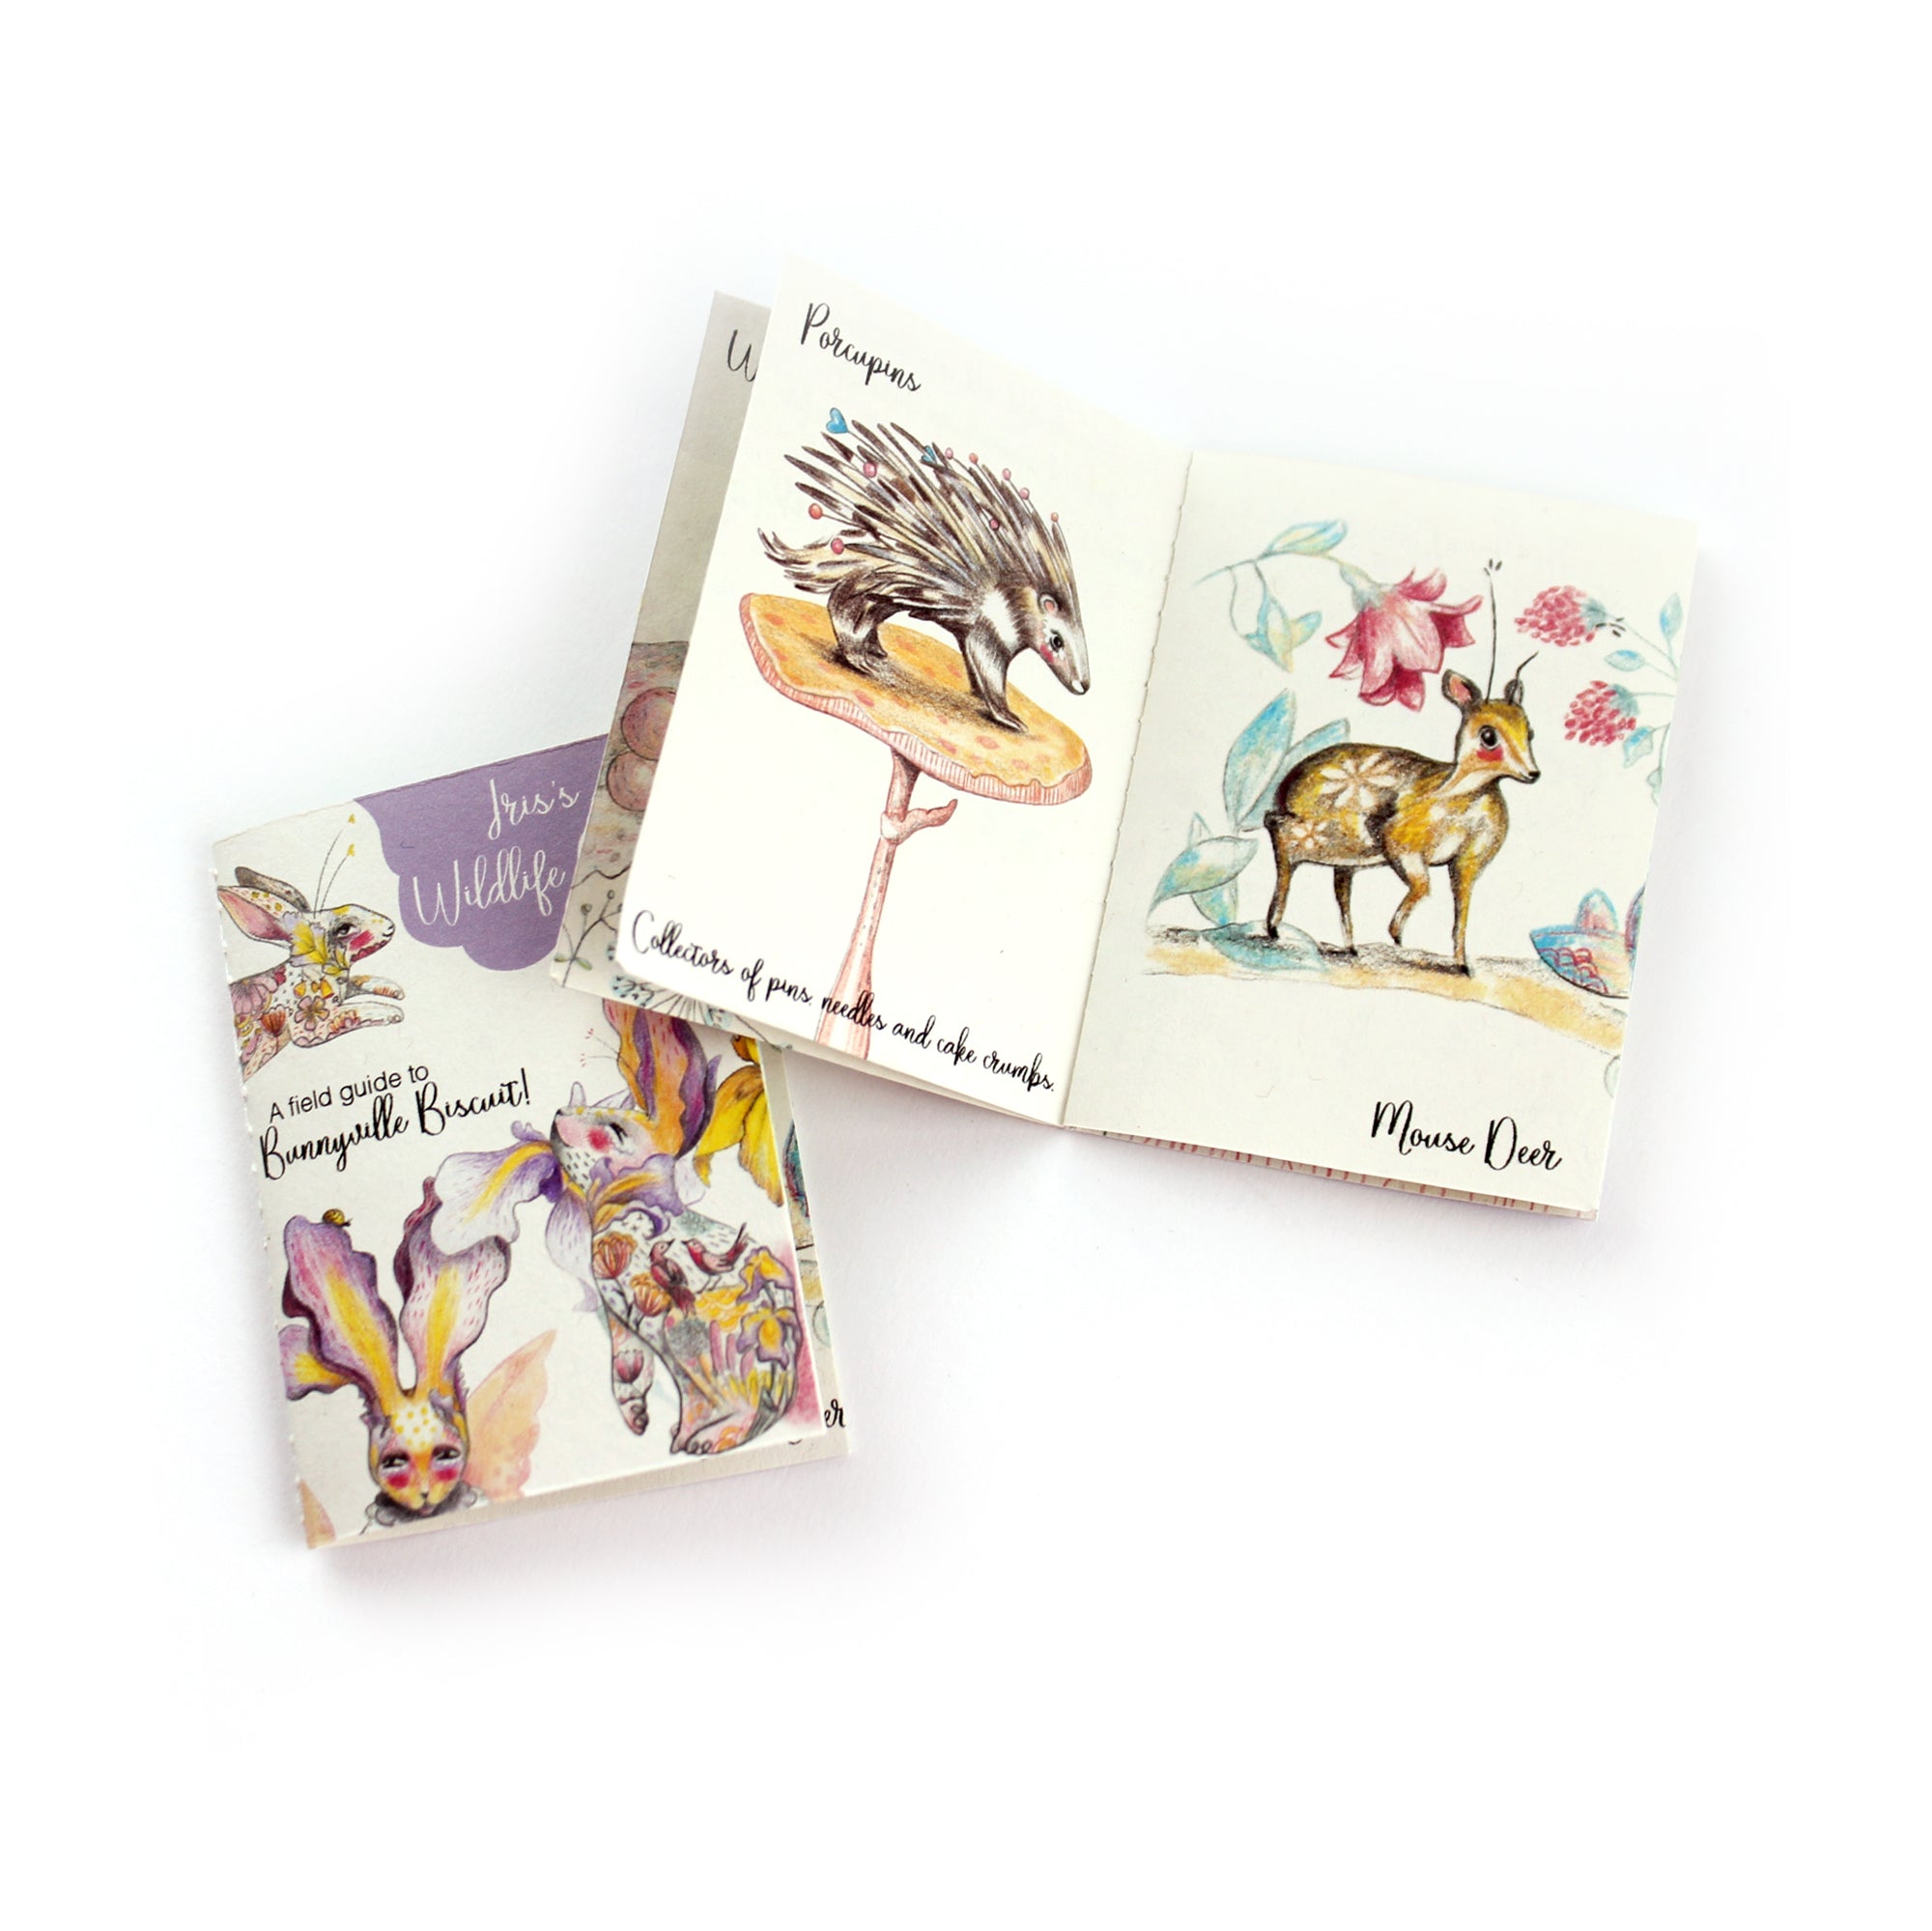 DIY Kit - Iris the Flower Bunny with 12 page Handmade Illustrated Mini Book - FREE UK SHIPPING